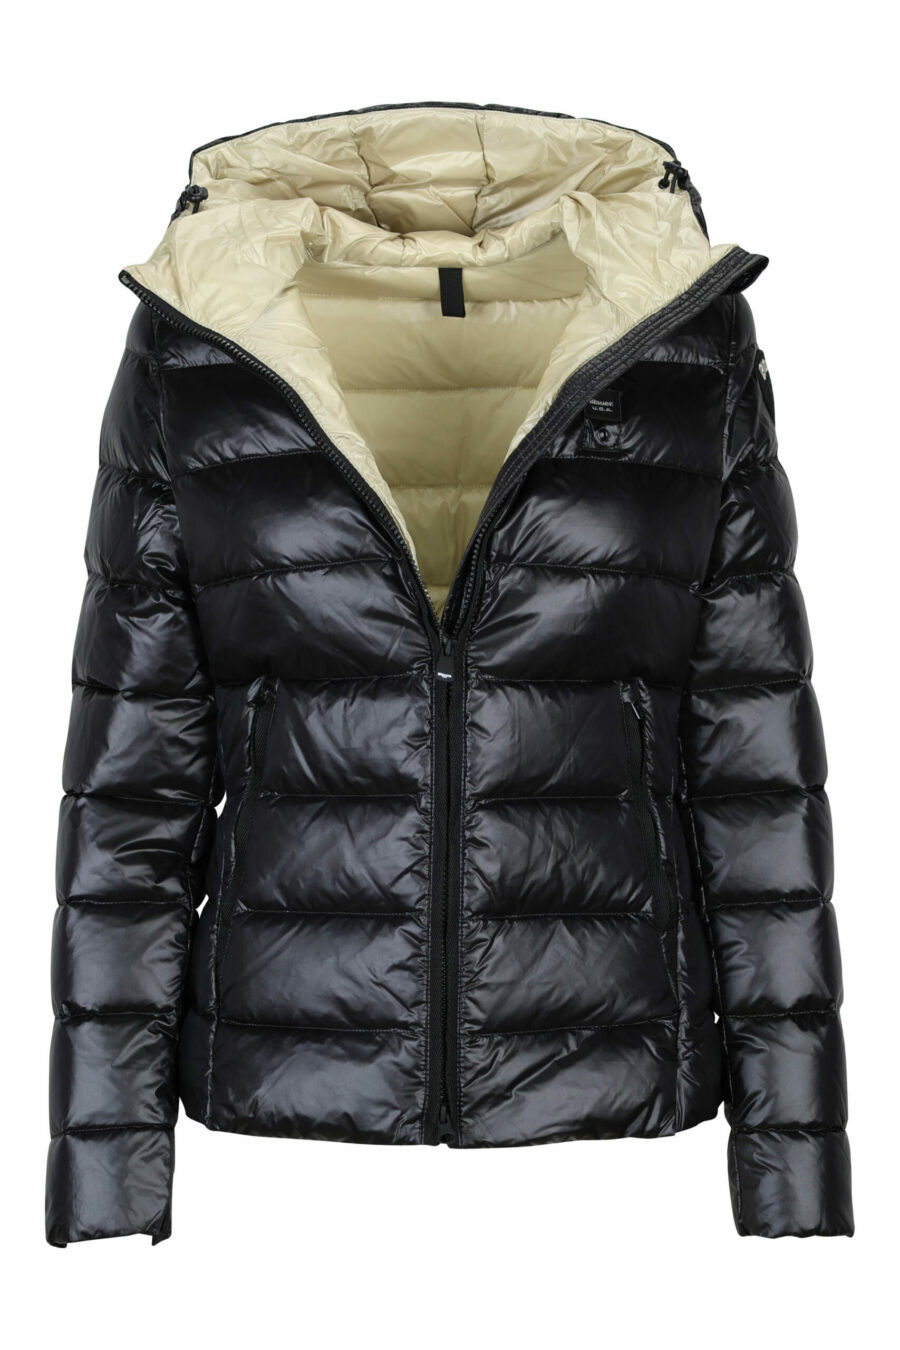 Black hooded jacket with straight lines with beige interior and logo patch - 8058610610302 1 scaled